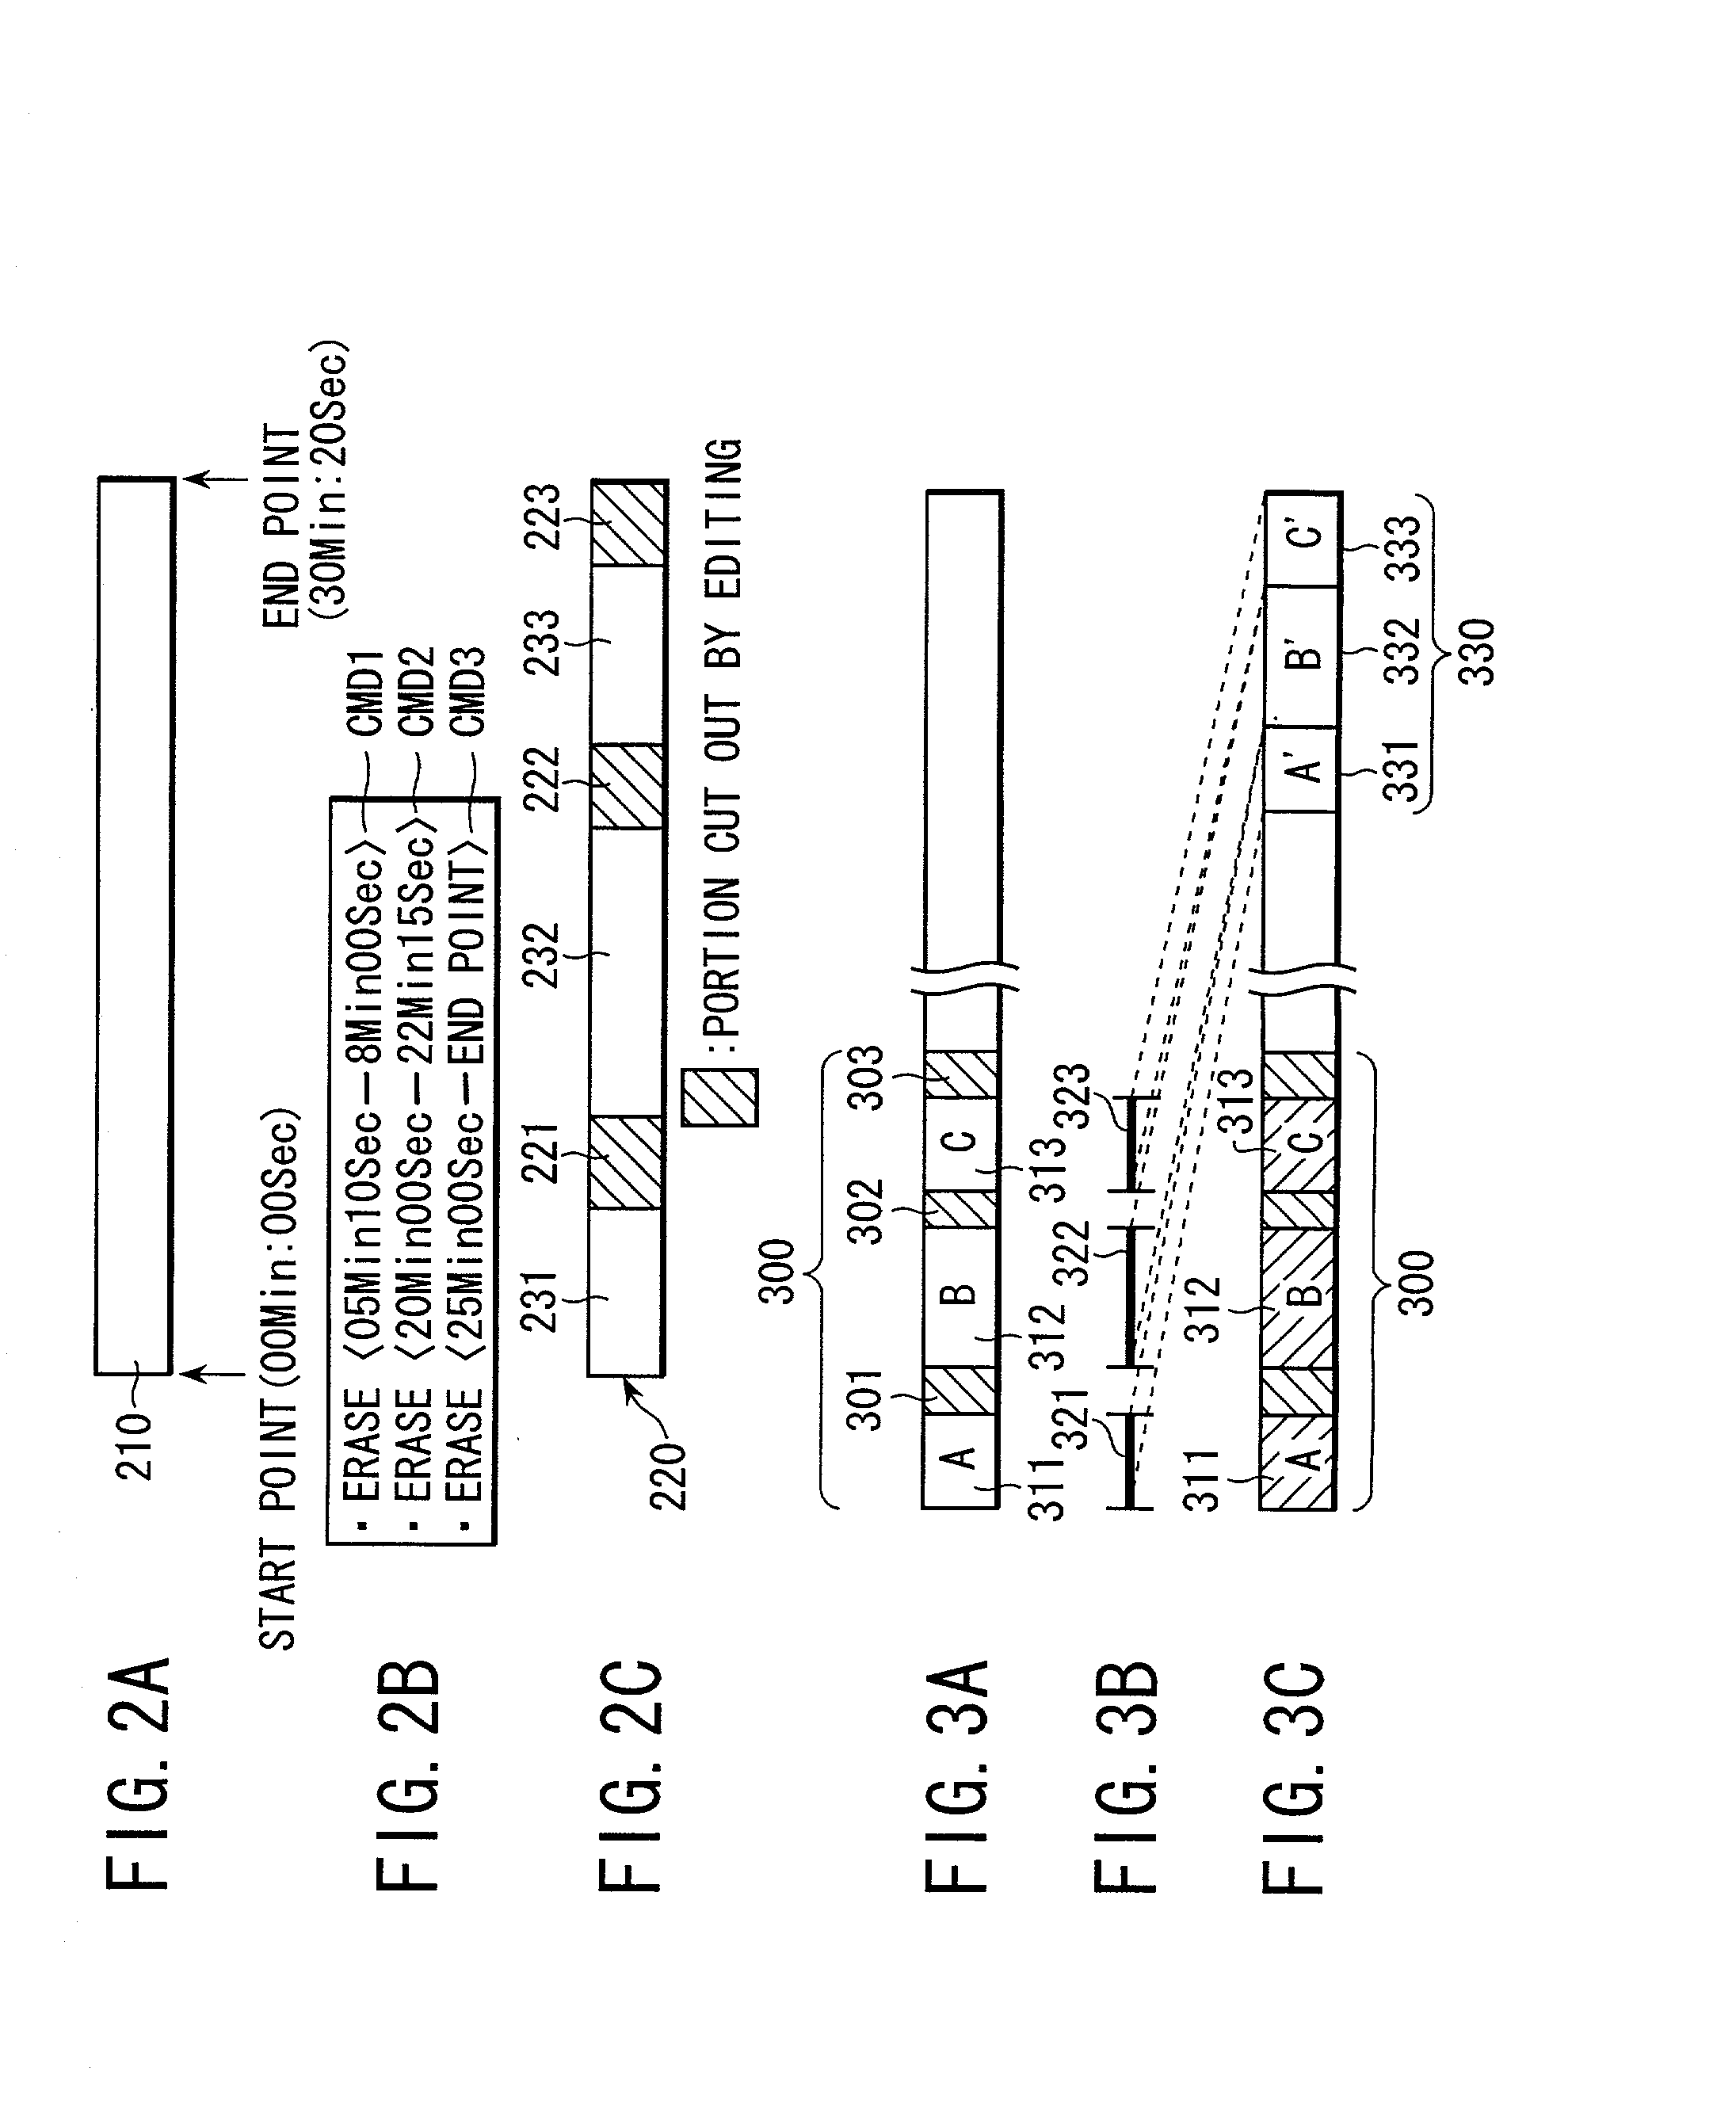 Apparatus and method for defragmentation in disk storage system